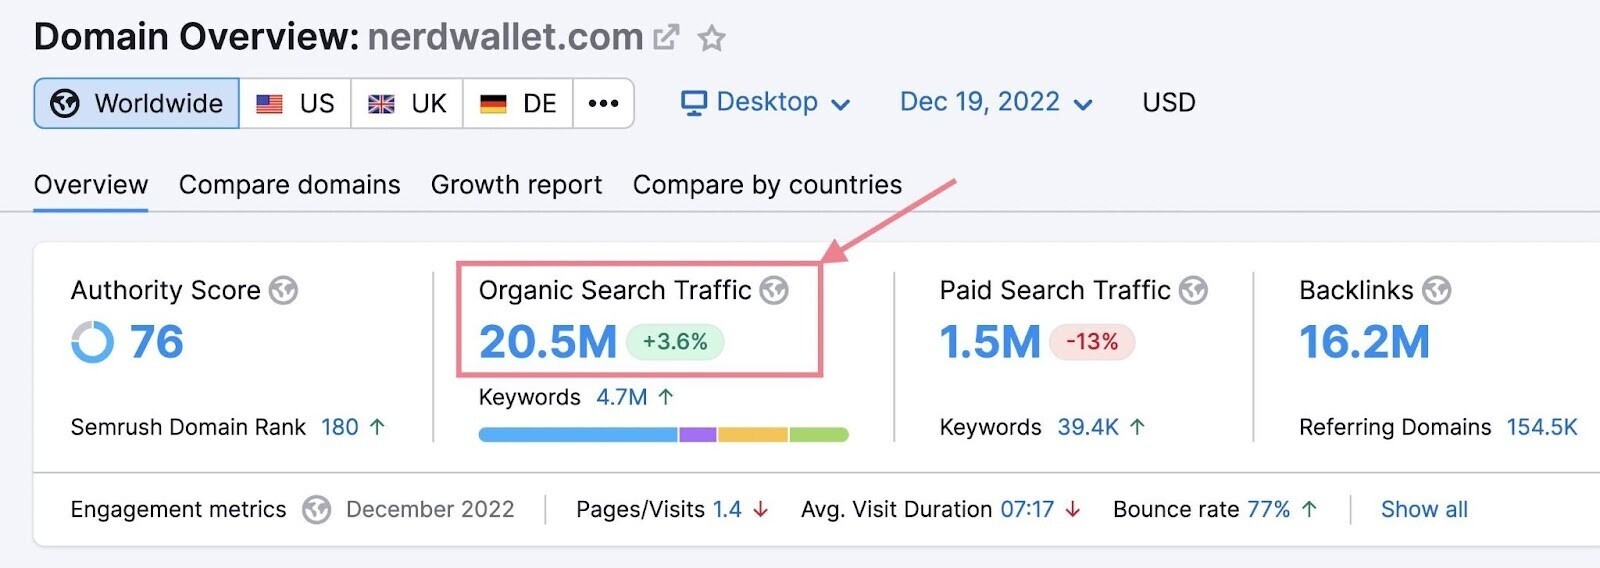 NerdWallet’s organic and paid search metrics